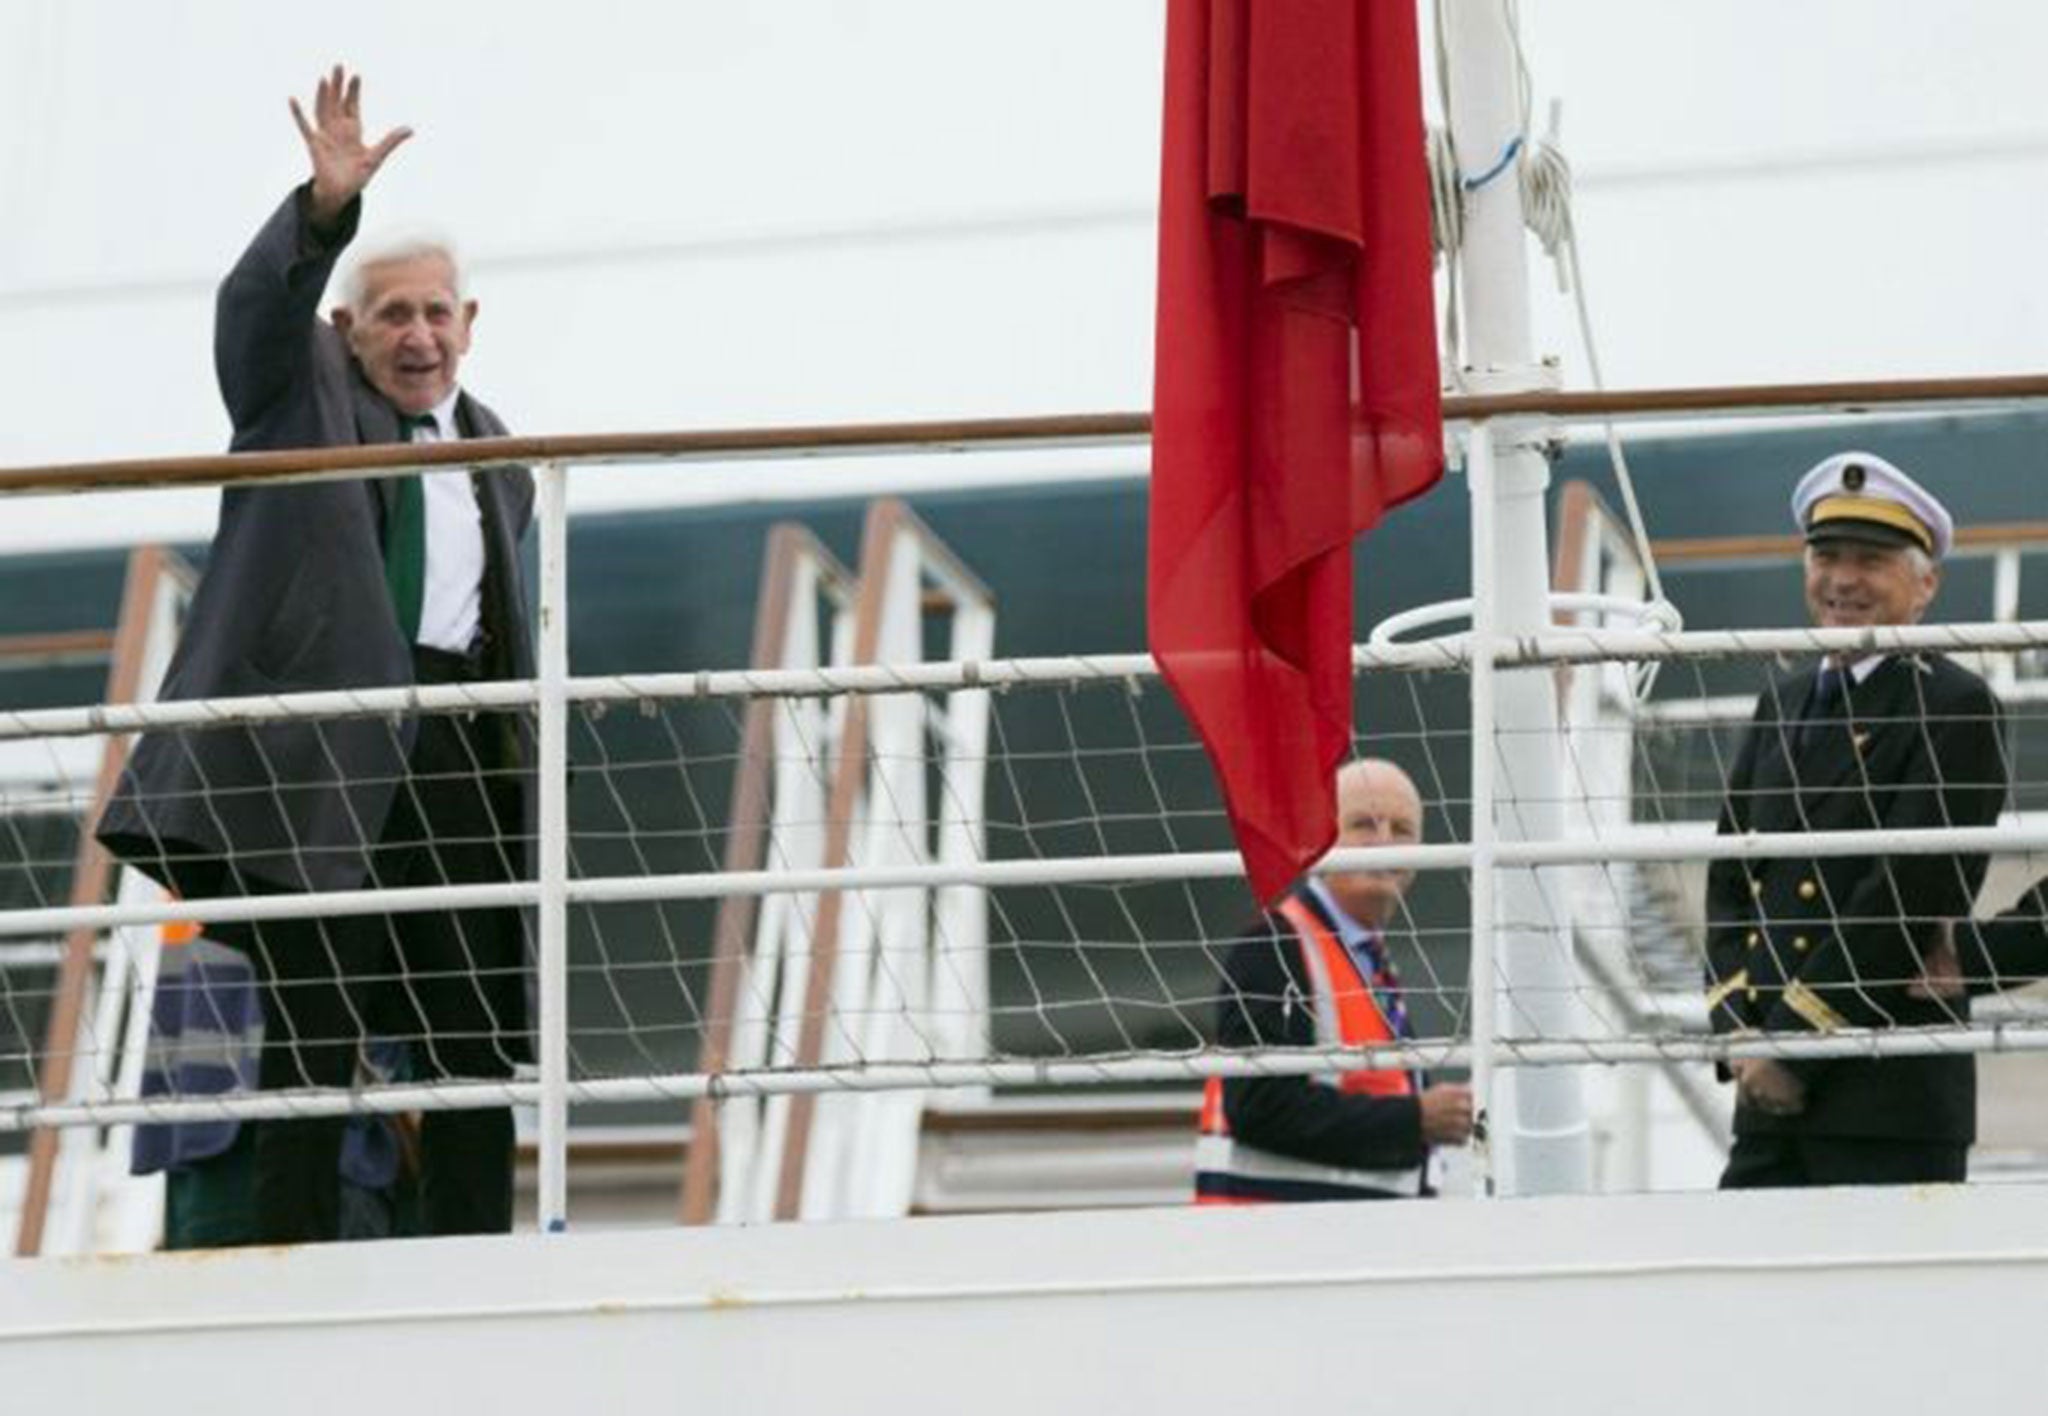 Brittany Ferries' skipper, Captain Olivier Macoin, right, smiles as war veteran Bernard Jordan gestures, from the deck of the ferry Normandie at Portsmouth Harbour